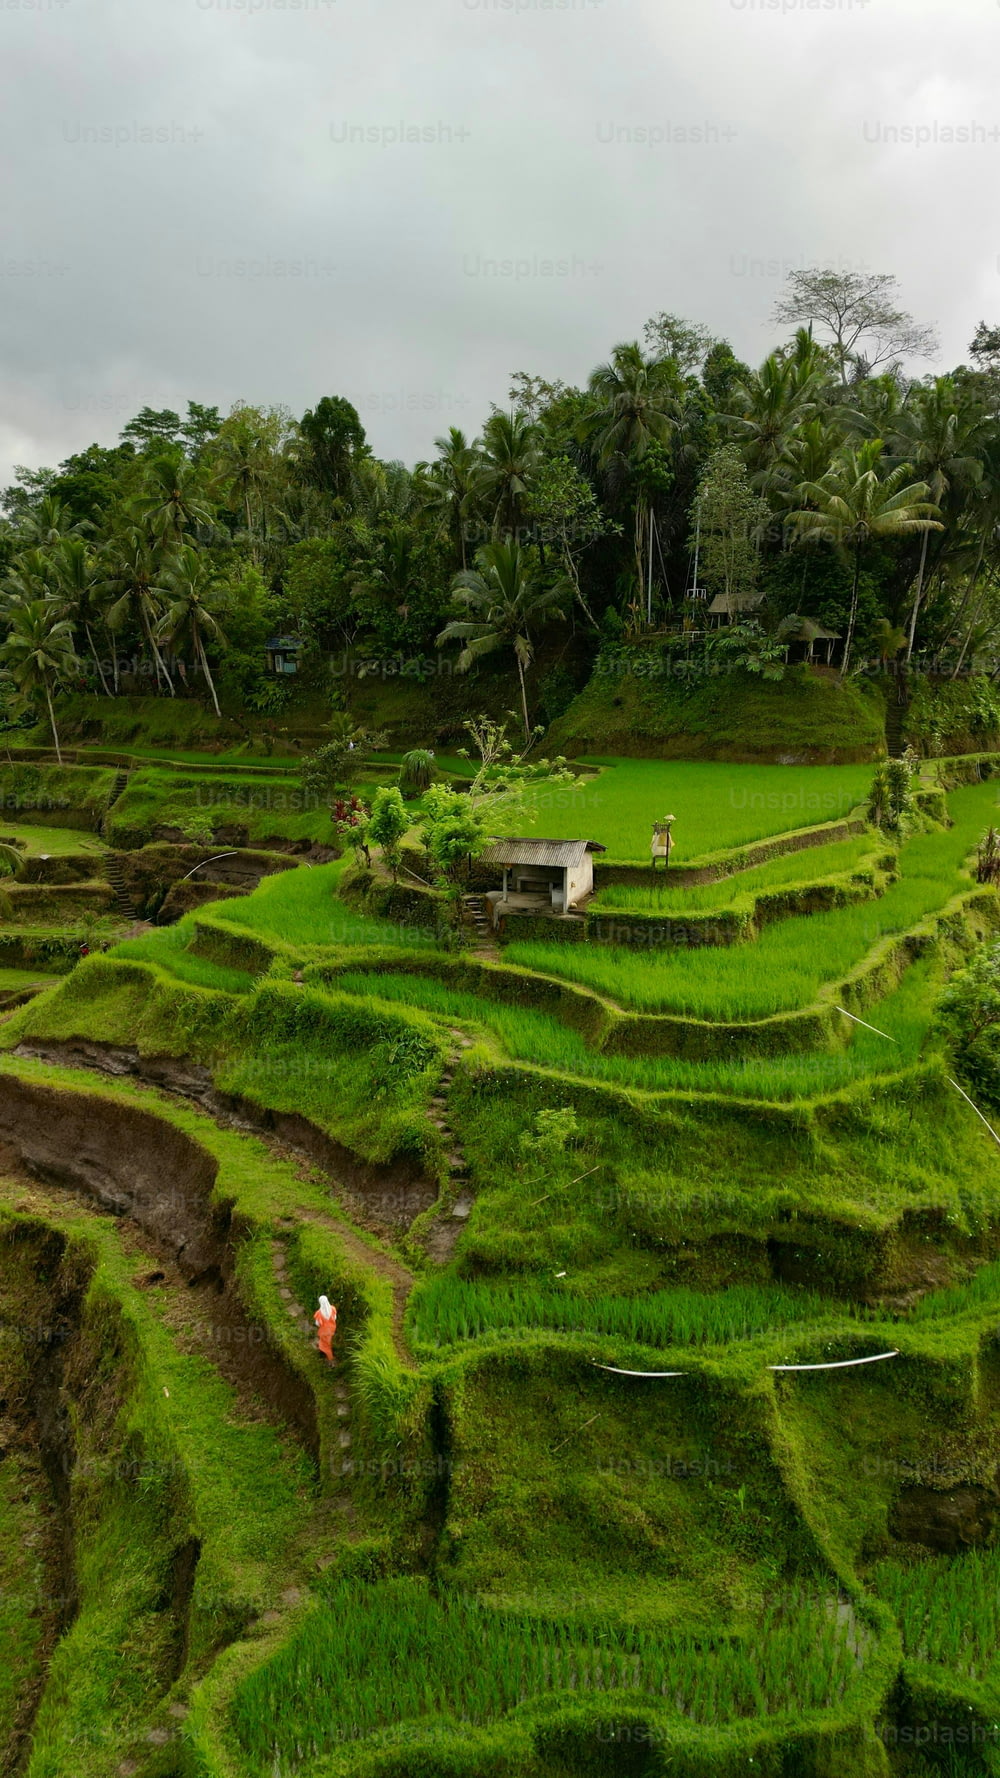 A vertical aerial view of a person climbing up the Tegallalang Rice Terrace in Bali, Indonesia